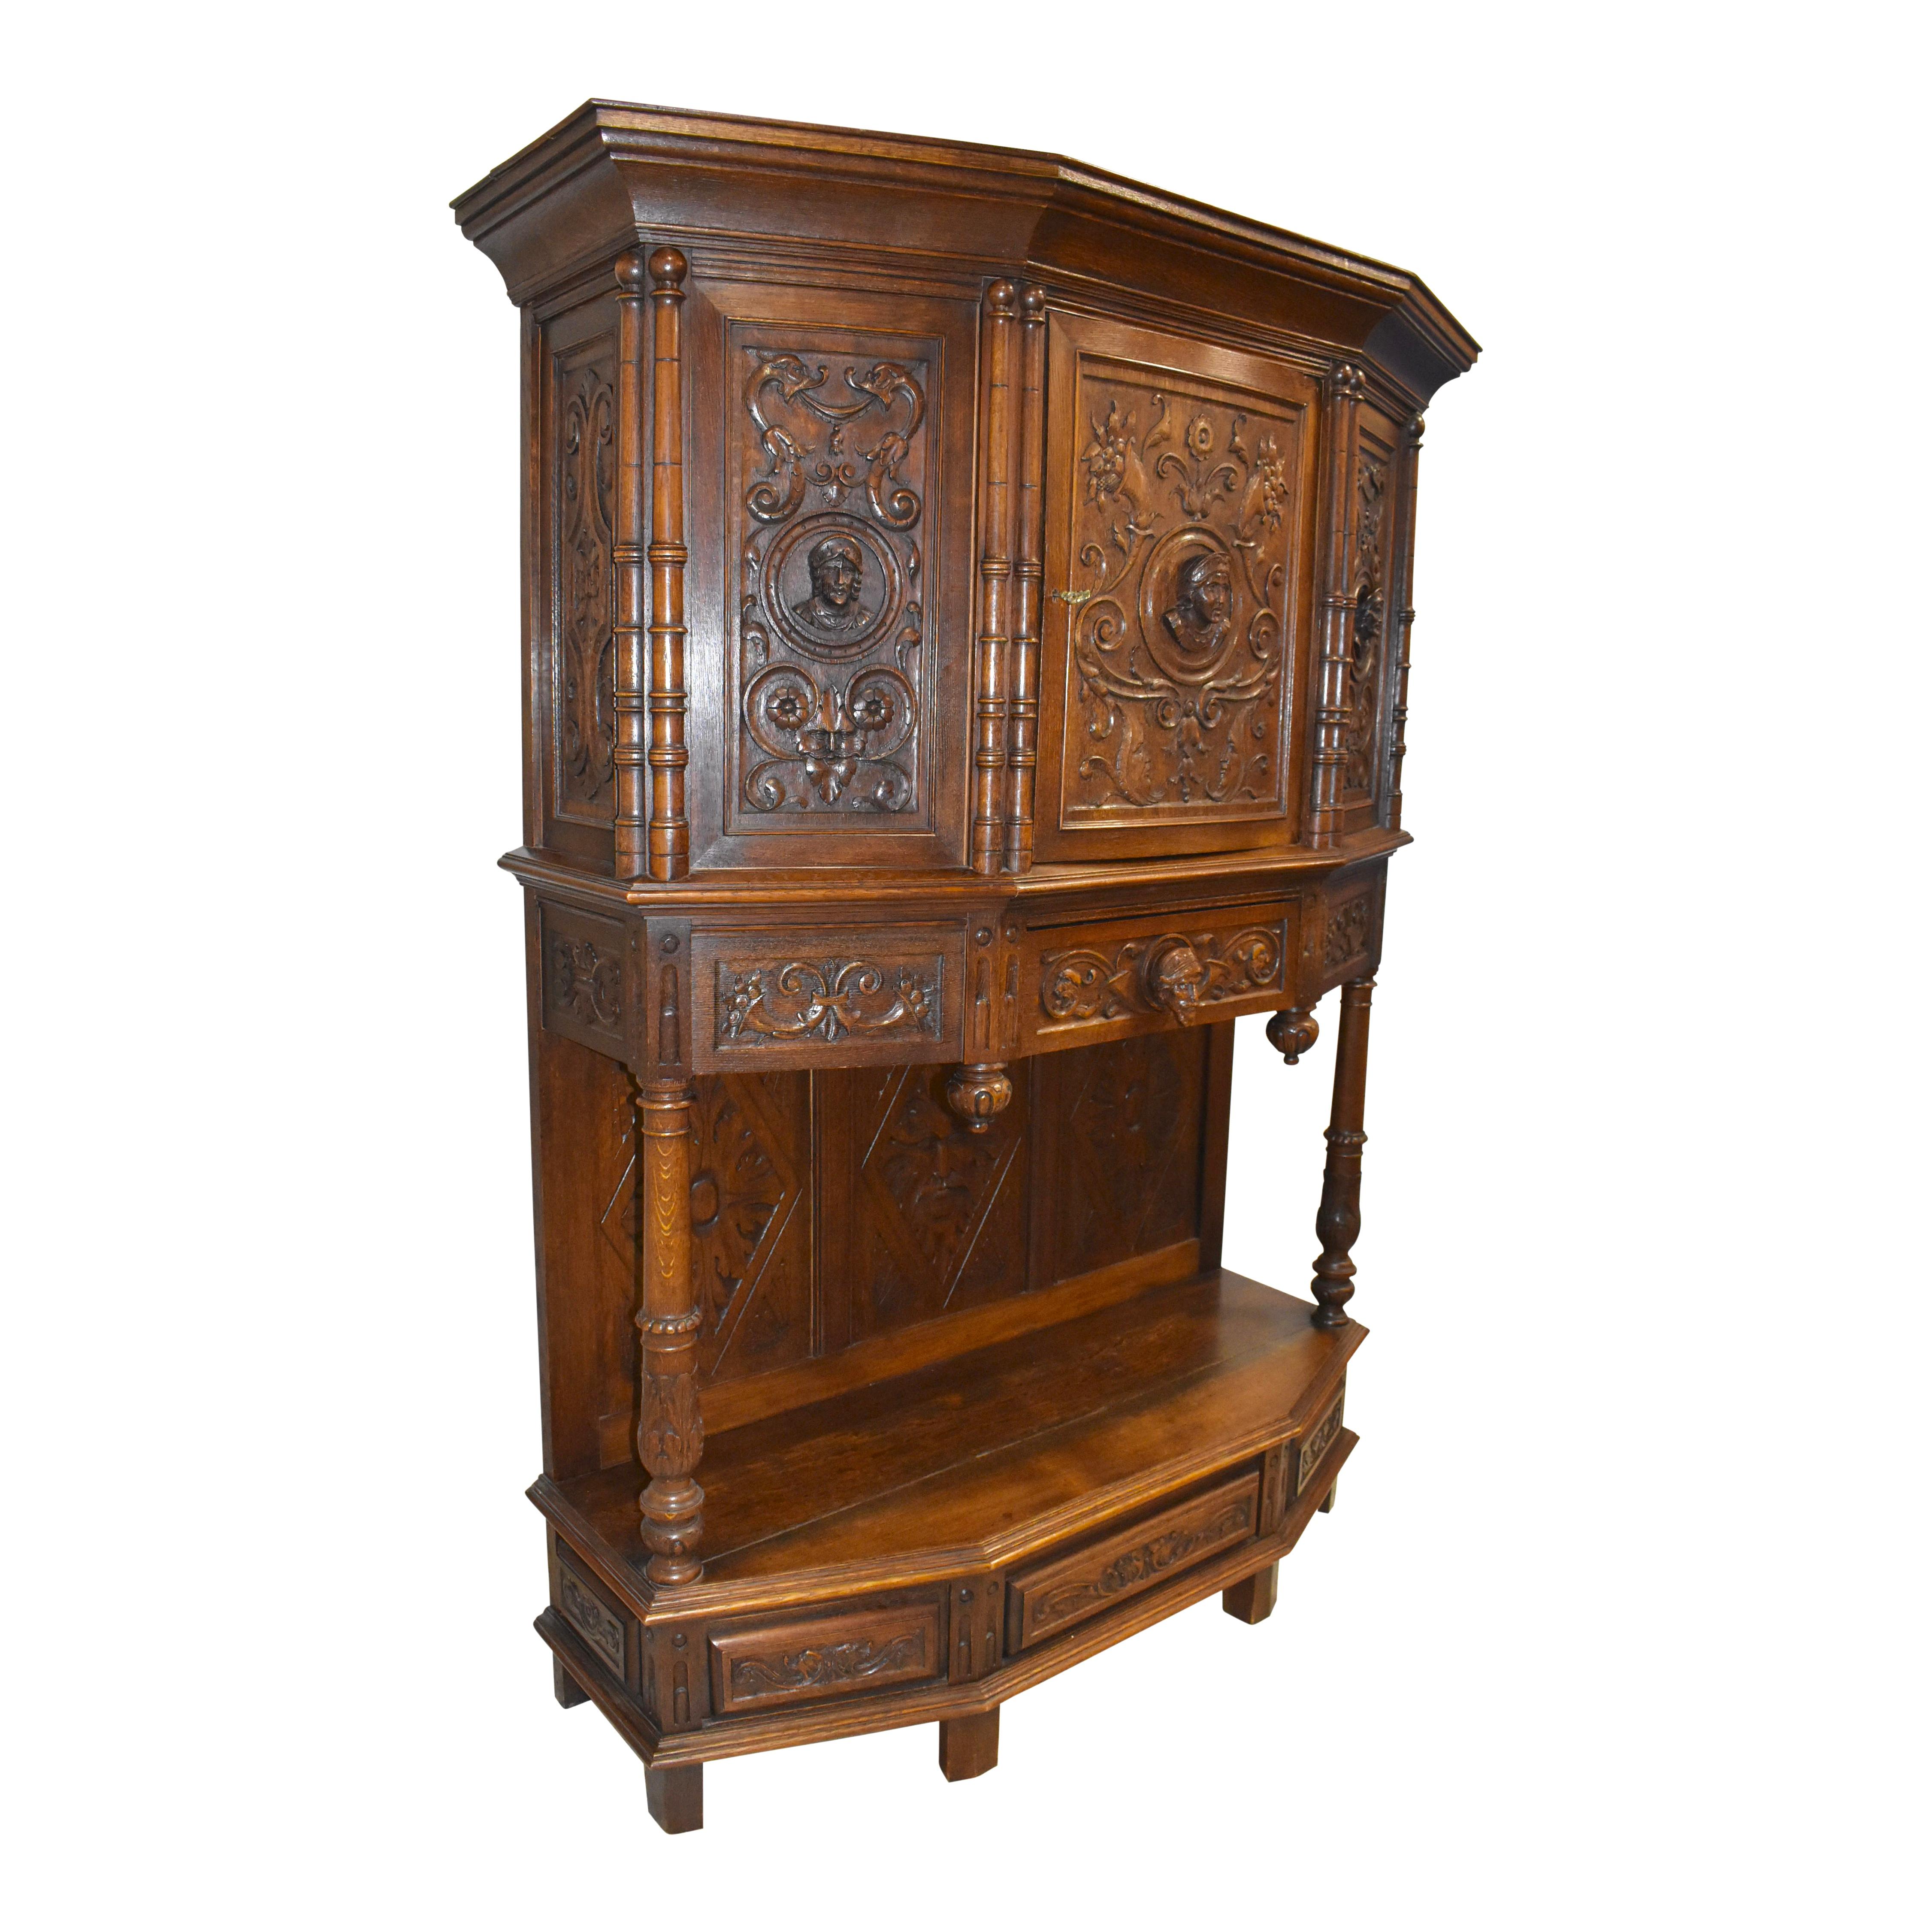 Carved in England in the early-20th century, this handsome breakfront cabinet boasts an imposing appearance with its sharp lines and solid oak construction. The heads of four stately character are carved on the door, side panels, and a center drawer